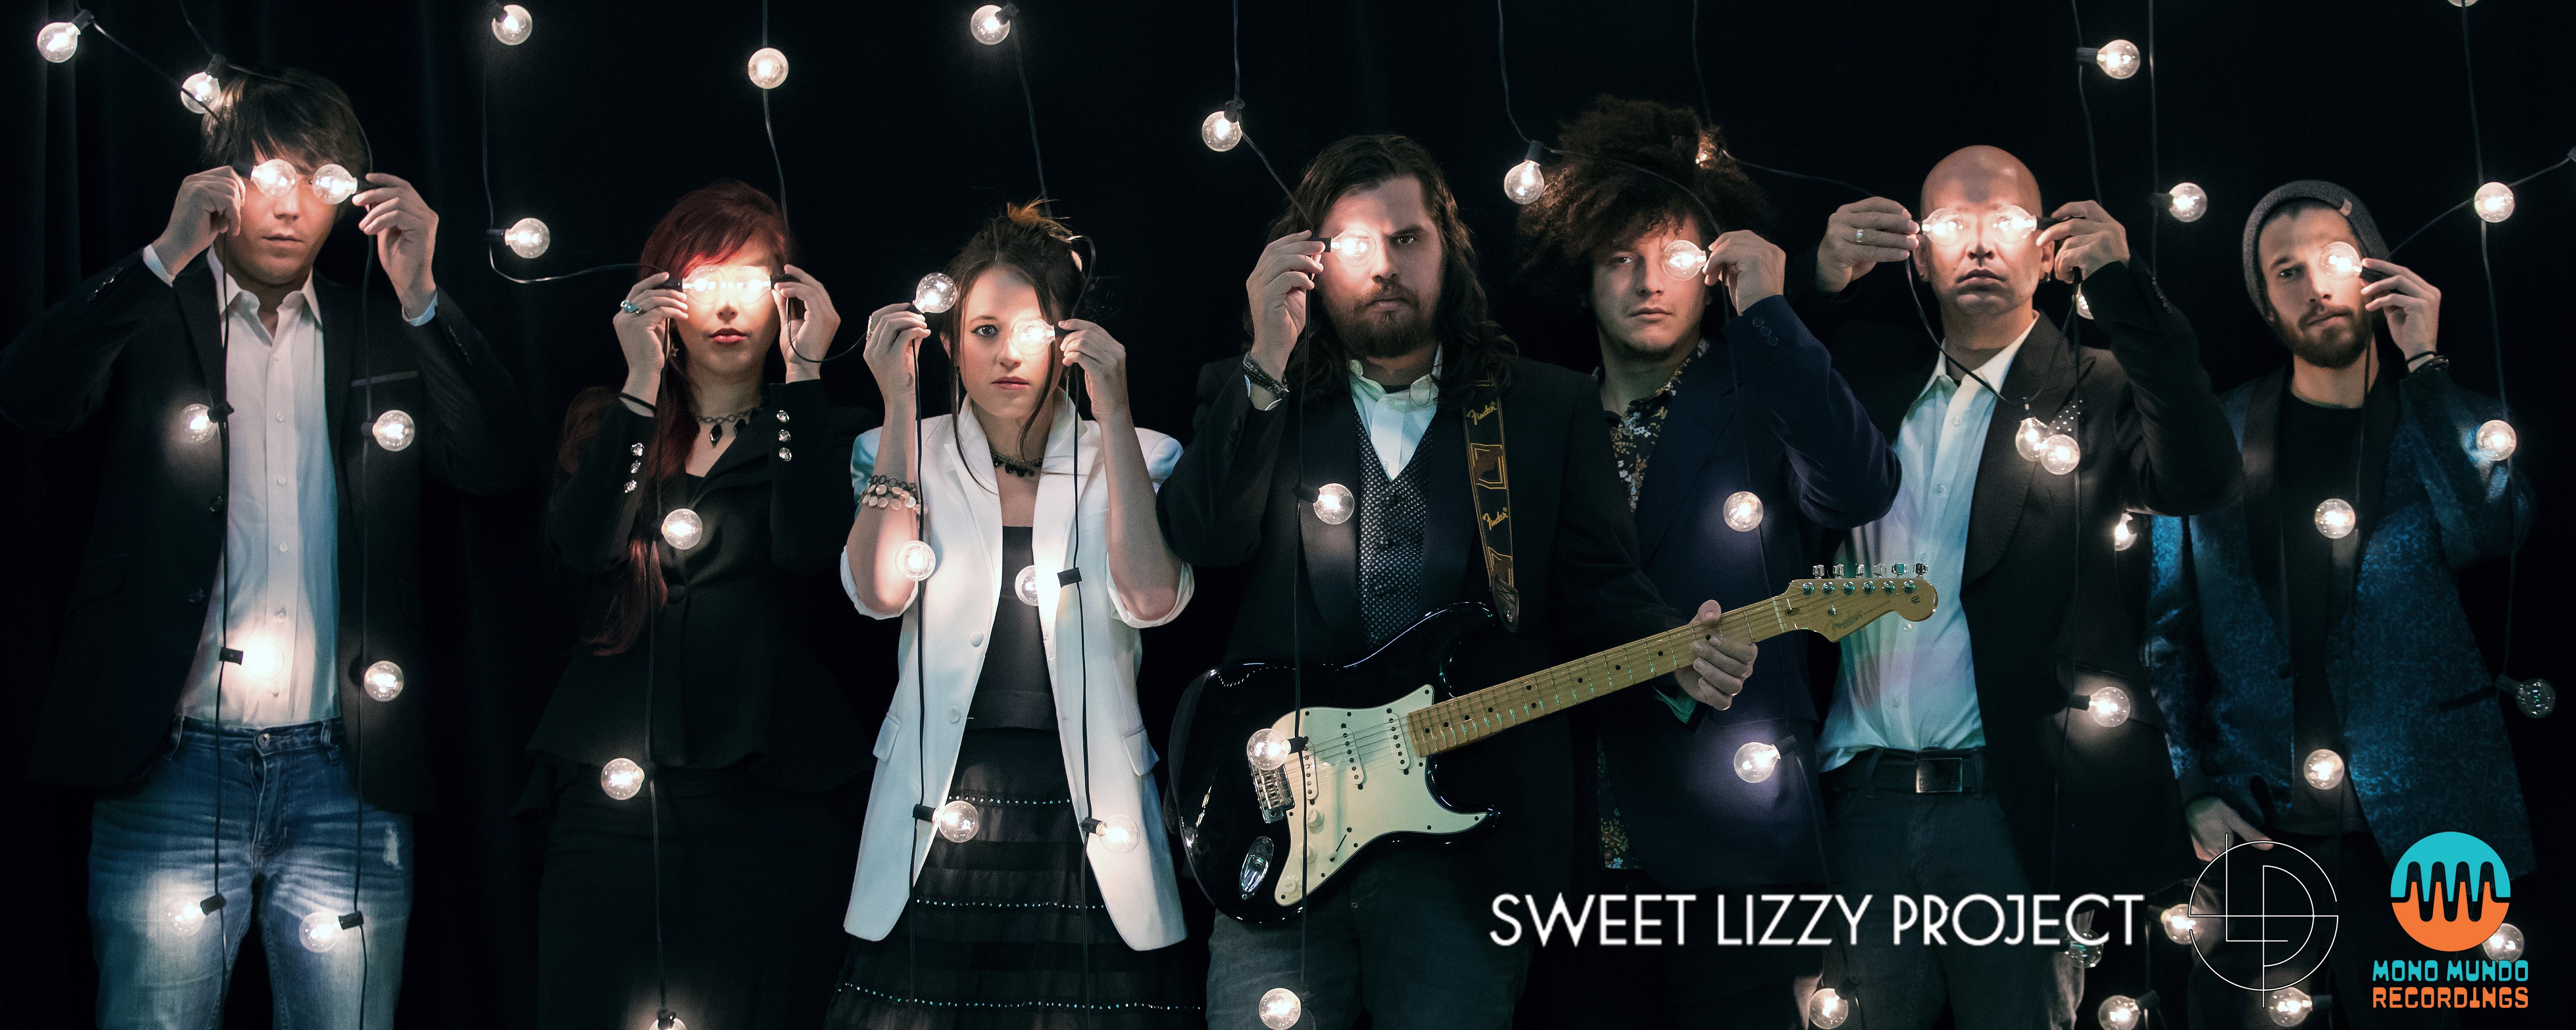 Sweet Lizzy Project